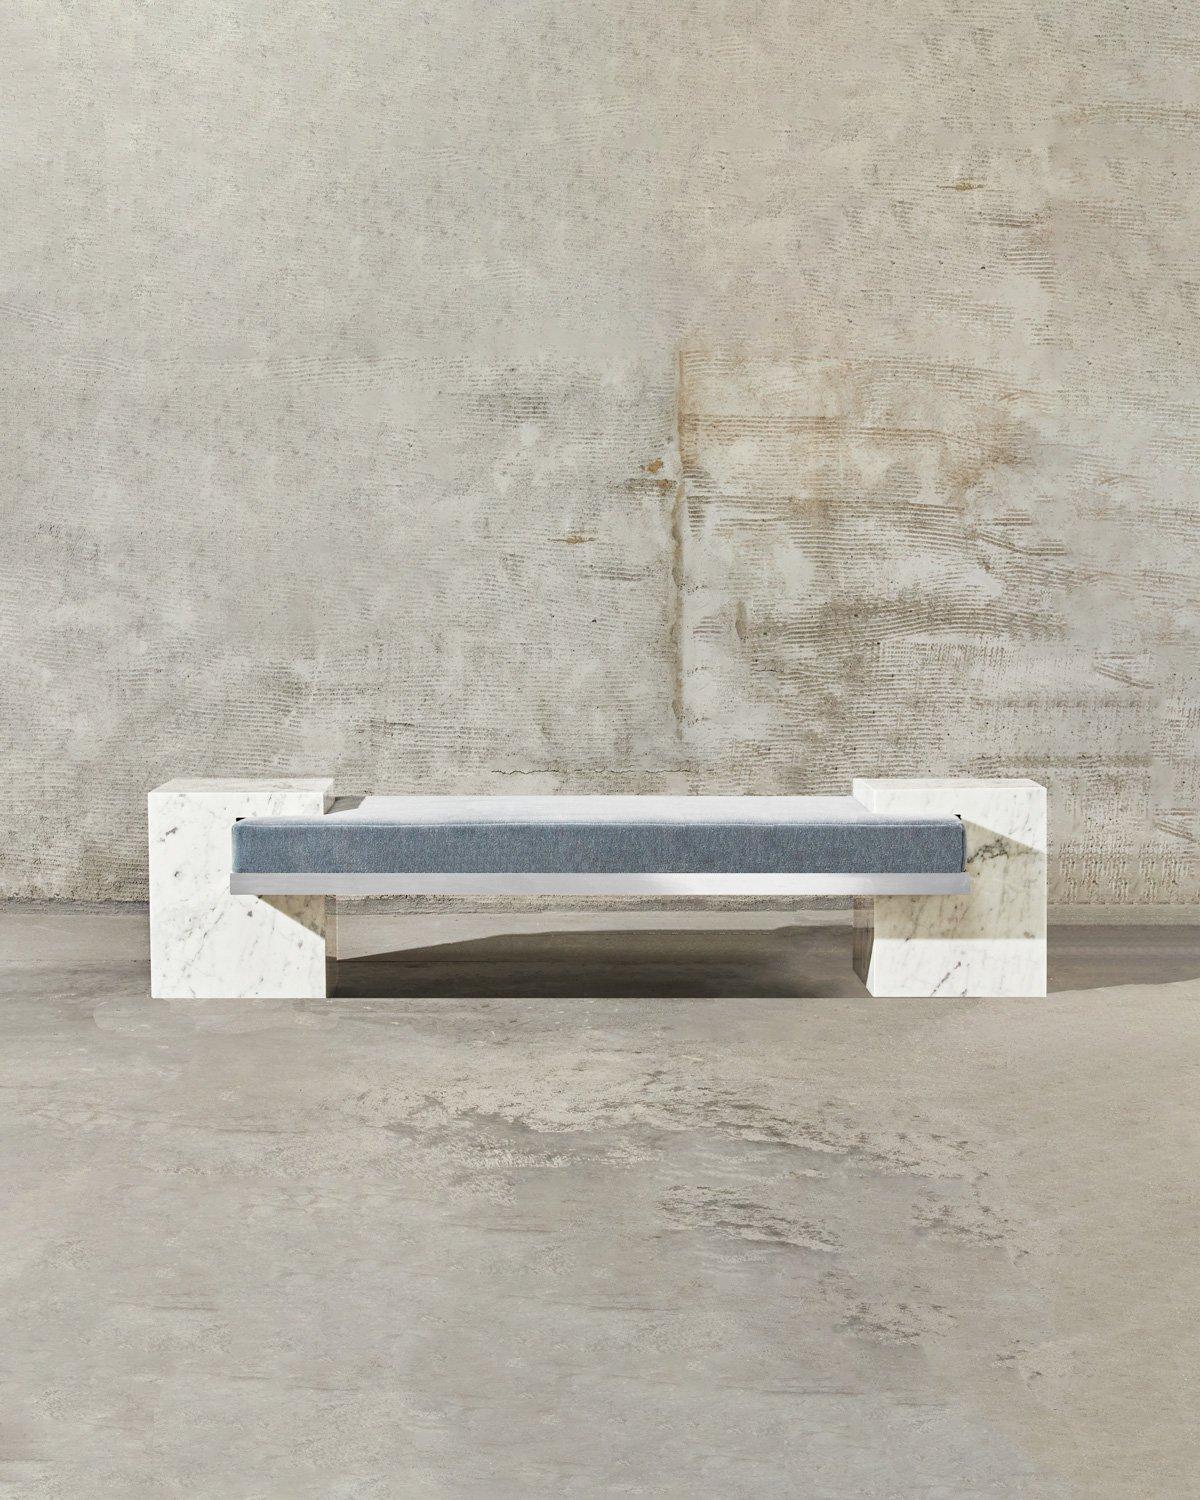 The coexist bench uses balance and delicate harmony of materials meeting. The bench consists of a brushed nickel frame, Carrara marble cubes, and mattress upholstered in mohair fabric. 

The pieces fit together seamlessly, with the marble cubes